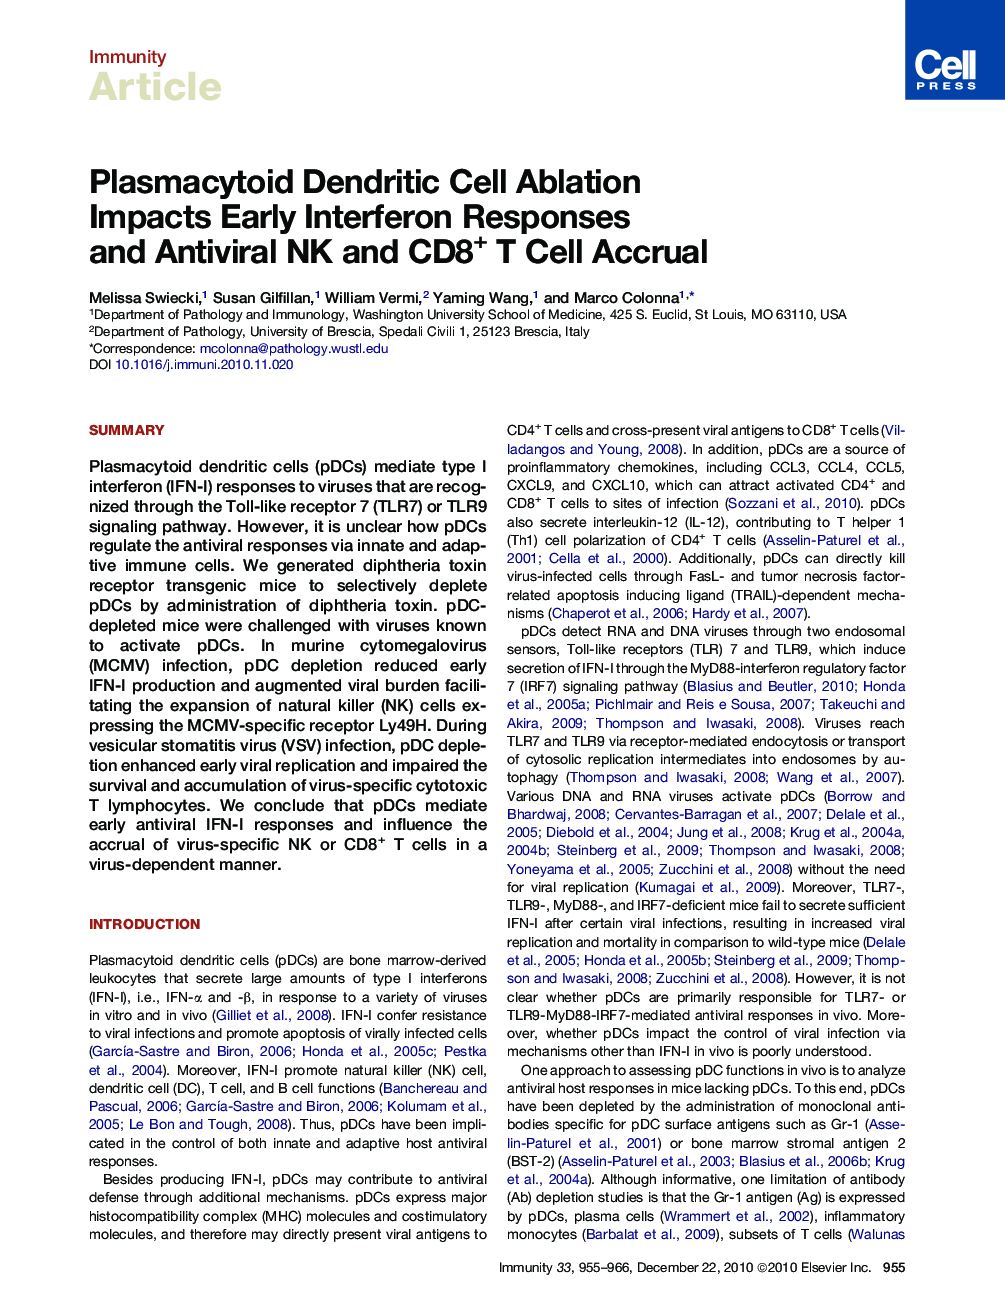 Plasmacytoid Dendritic Cell Ablation Impacts Early Interferon Responses and Antiviral NK and CD8+ T Cell Accrual